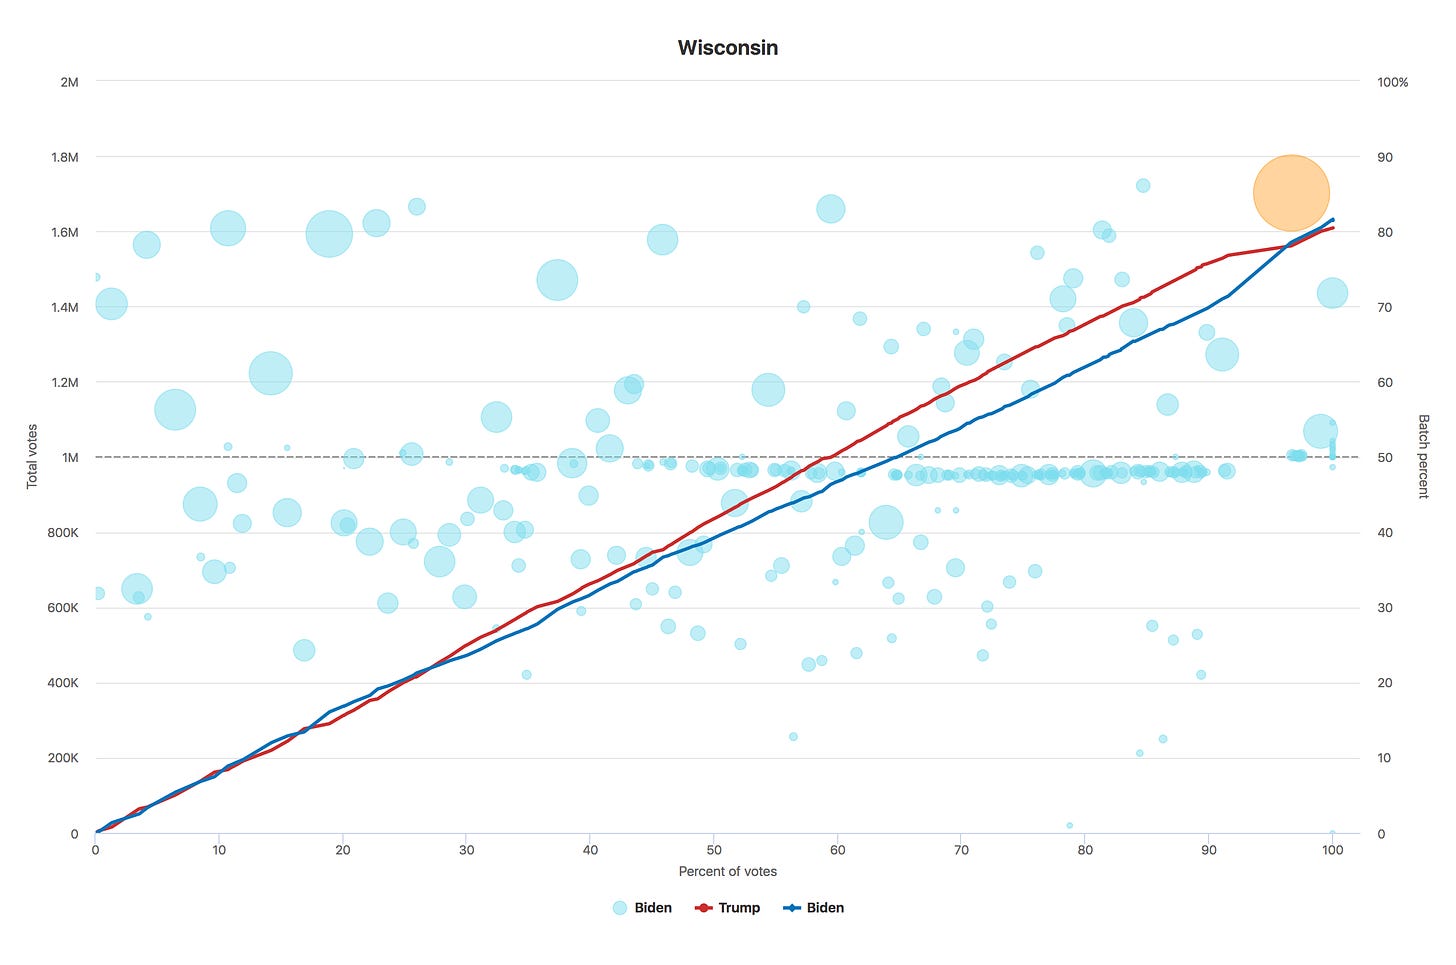 Chart of Wisconsin voting data over time